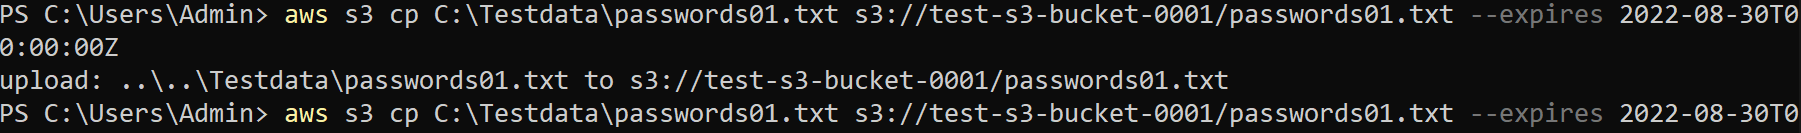 Copying a local file to the S3 bucket with an expiration date